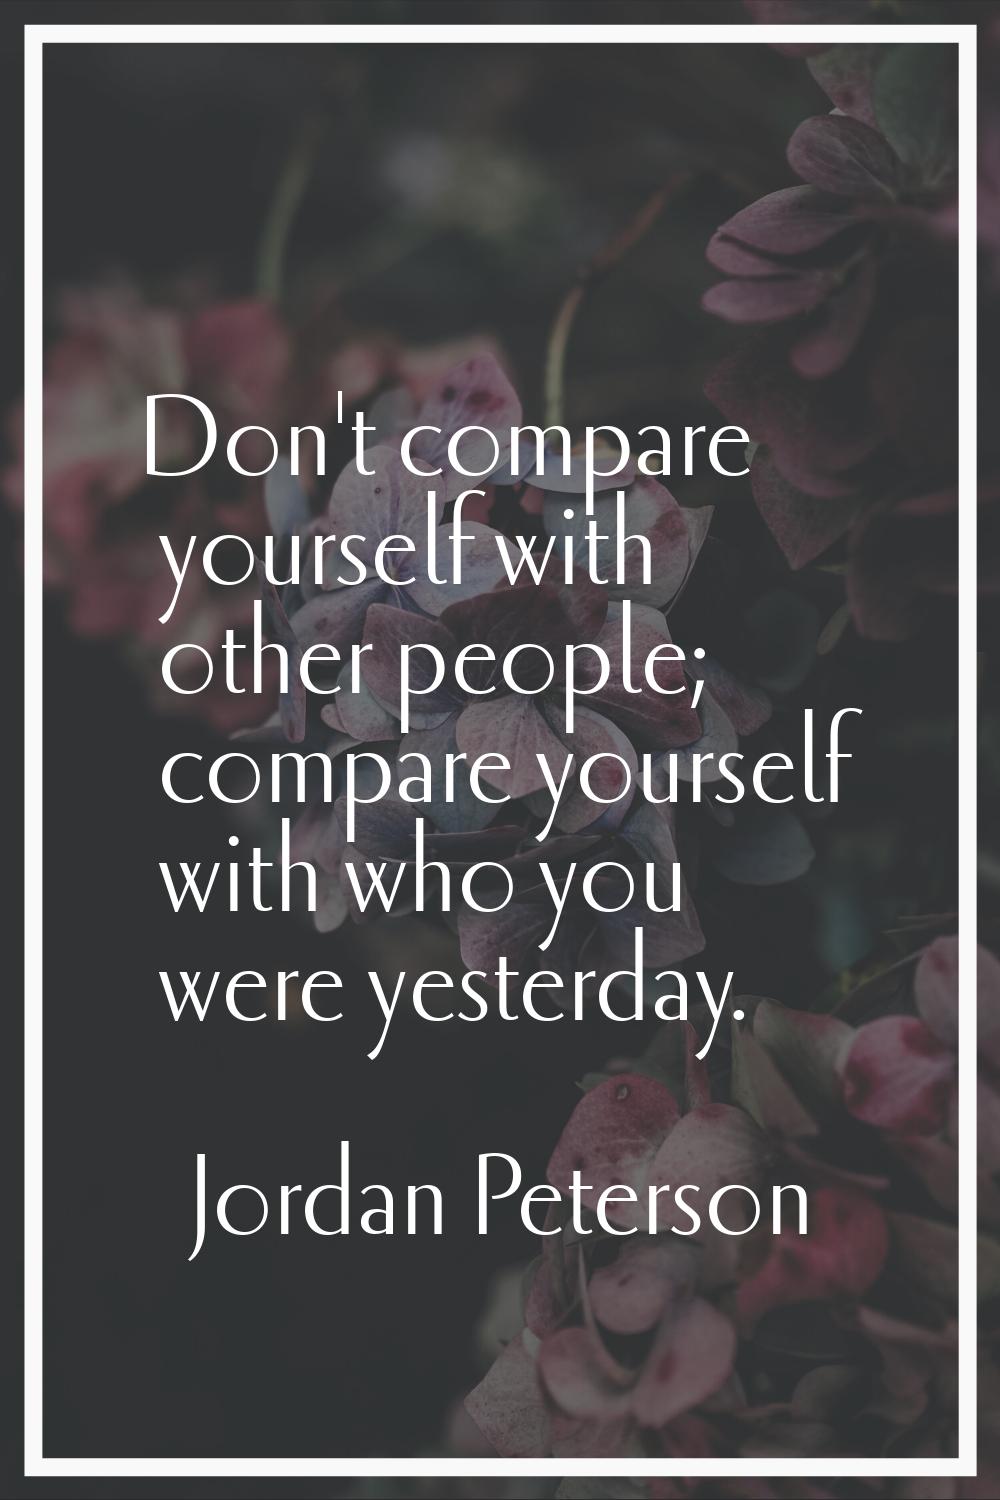 Don't compare yourself with other people; compare yourself with who you were yesterday.